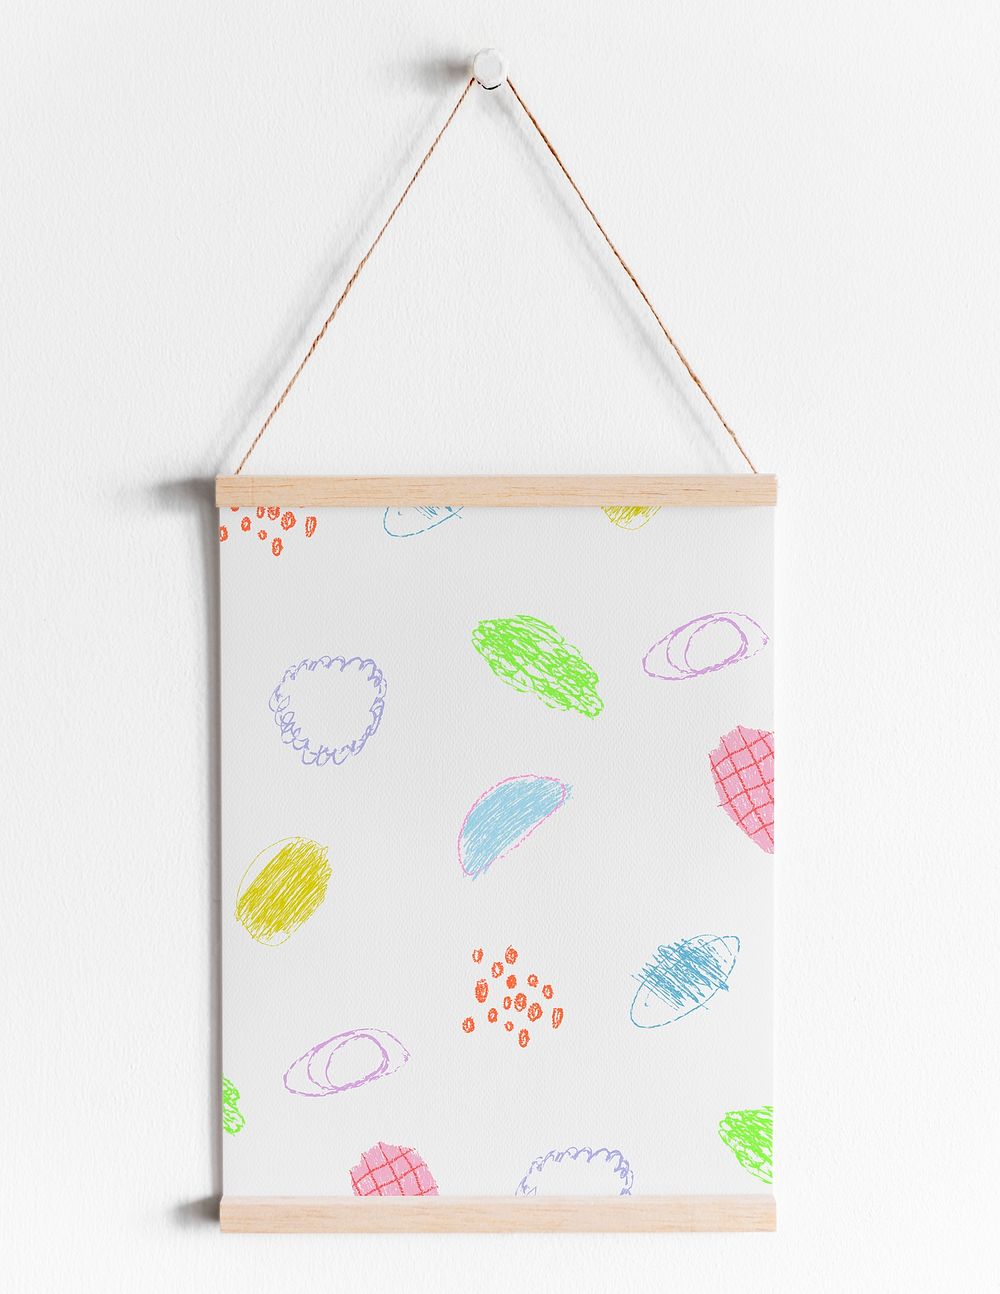 White board, kids pastel crayon abstract design